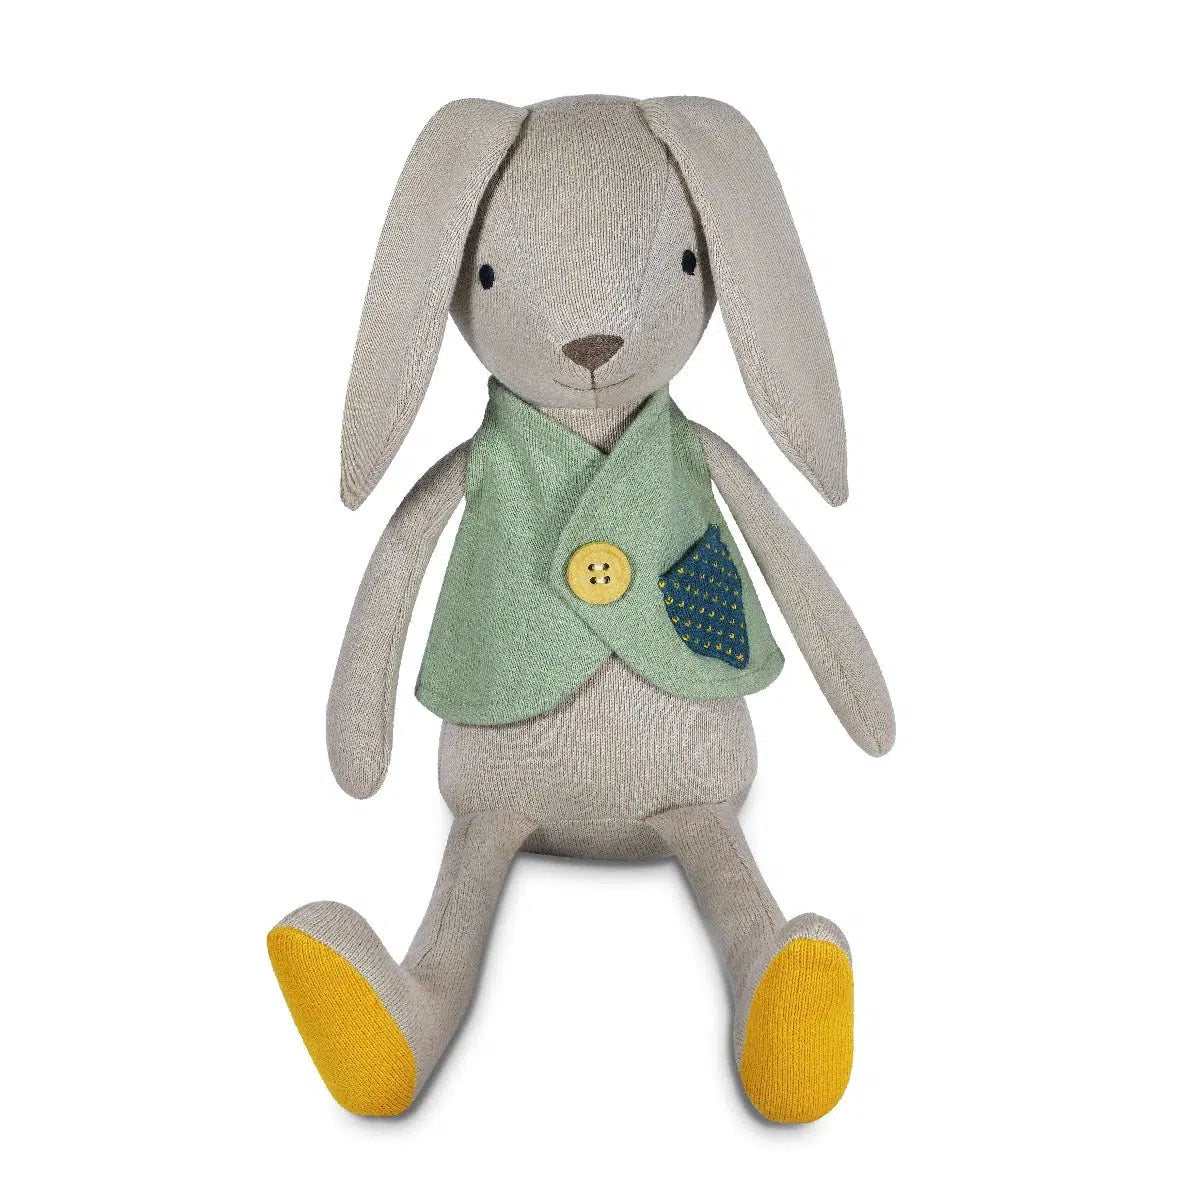 Front view of Knit Bunny Plush-Luca sitting.